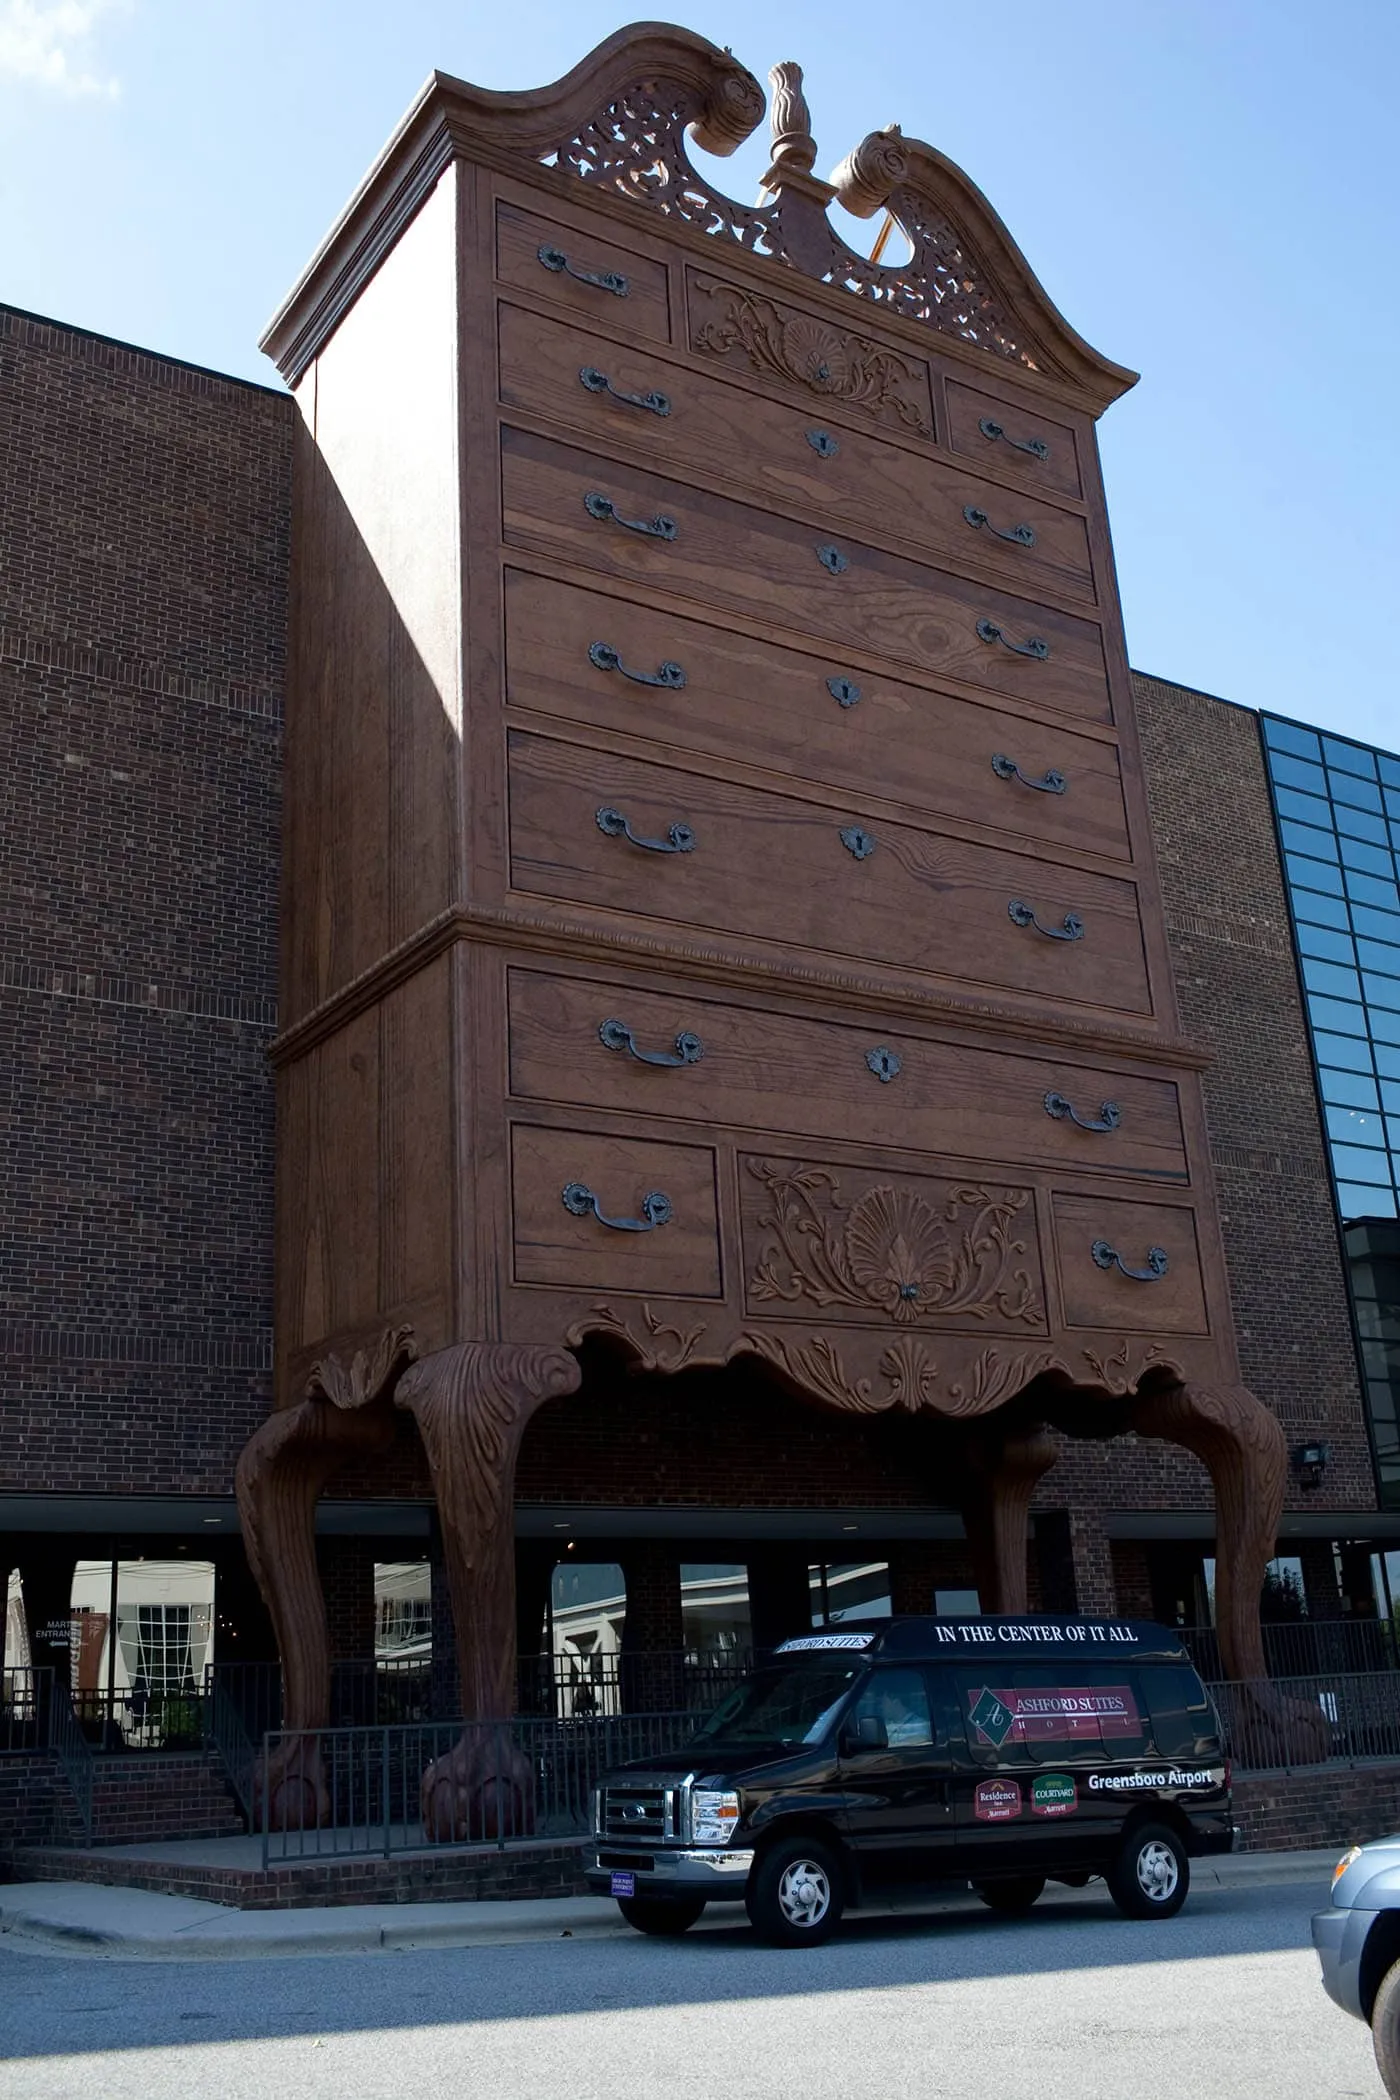 World's Largest Highboy Chest of Drawers - Giant Highboy Chest in Jamestown, North Carolina